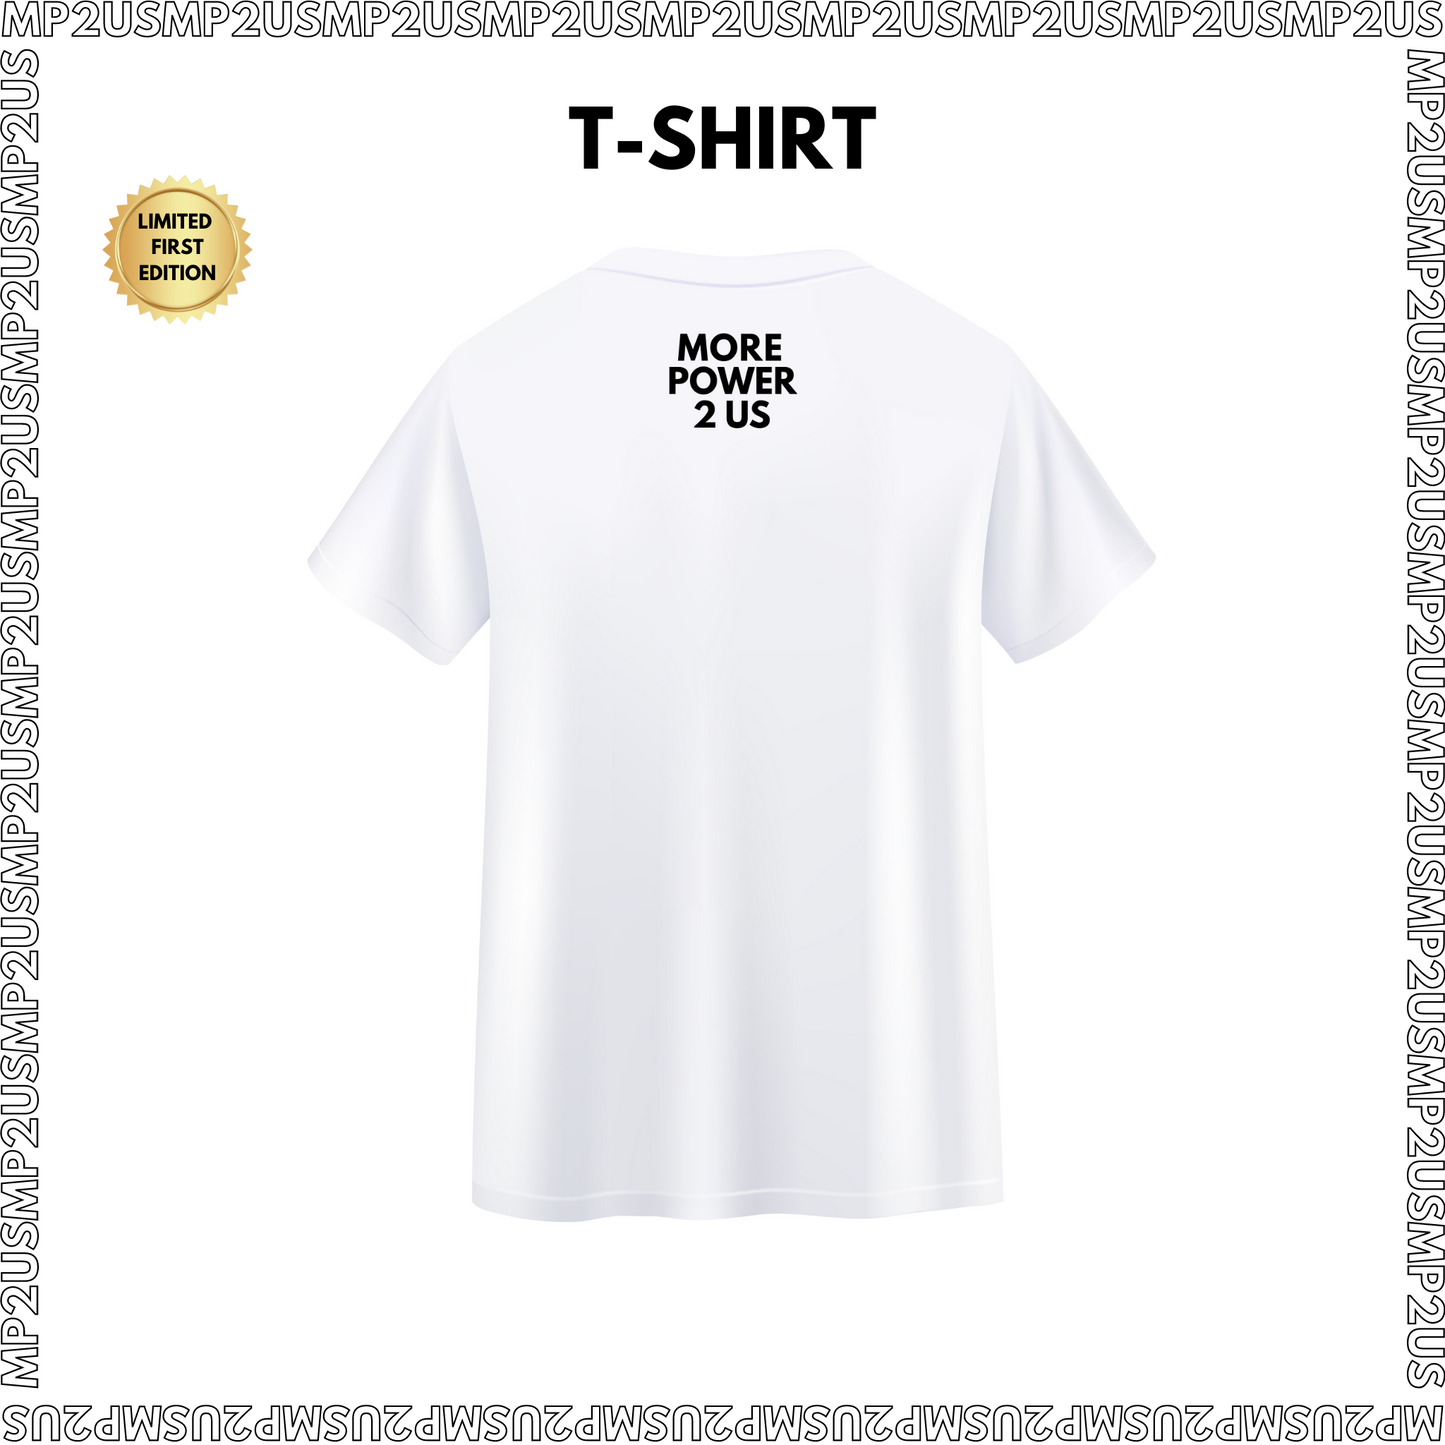 - PROUD 2 PAY PACK - BOOK (Digital + Physical) + T-SHIRT (White)